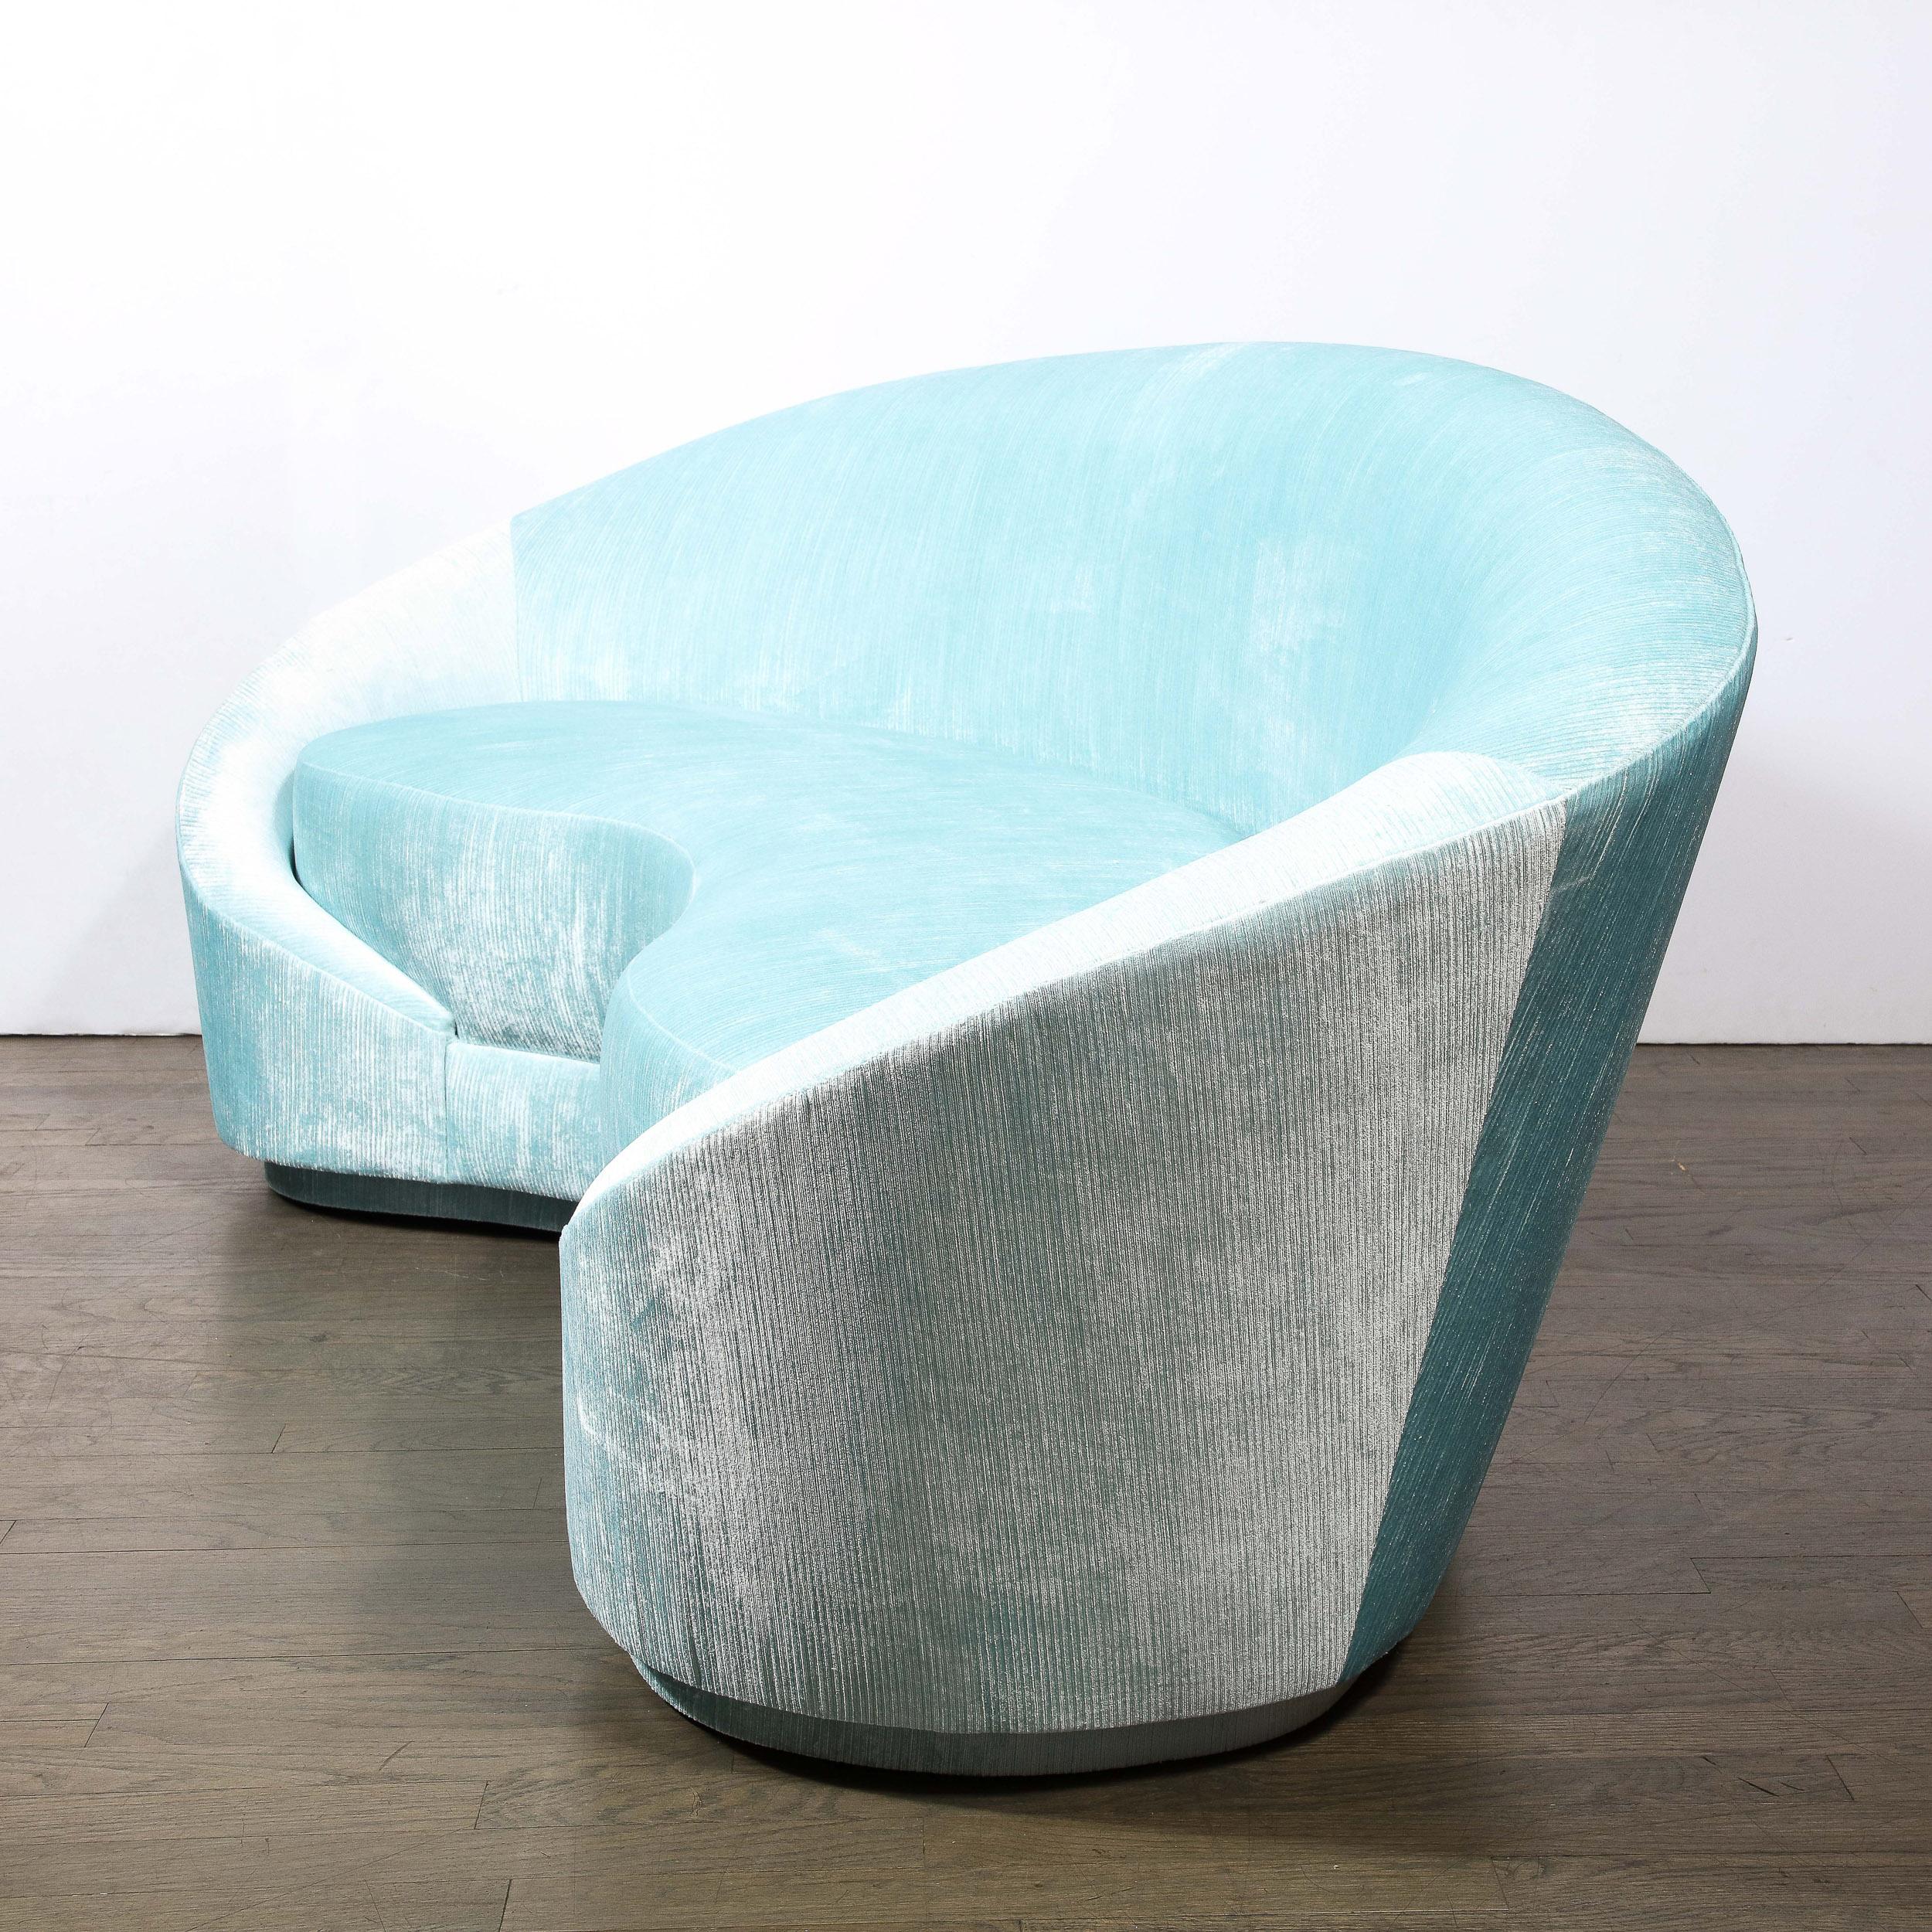 1940s Style Modernist Custom Sweeping Curved Sofa in Aquamarine Velvet In New Condition For Sale In New York, NY